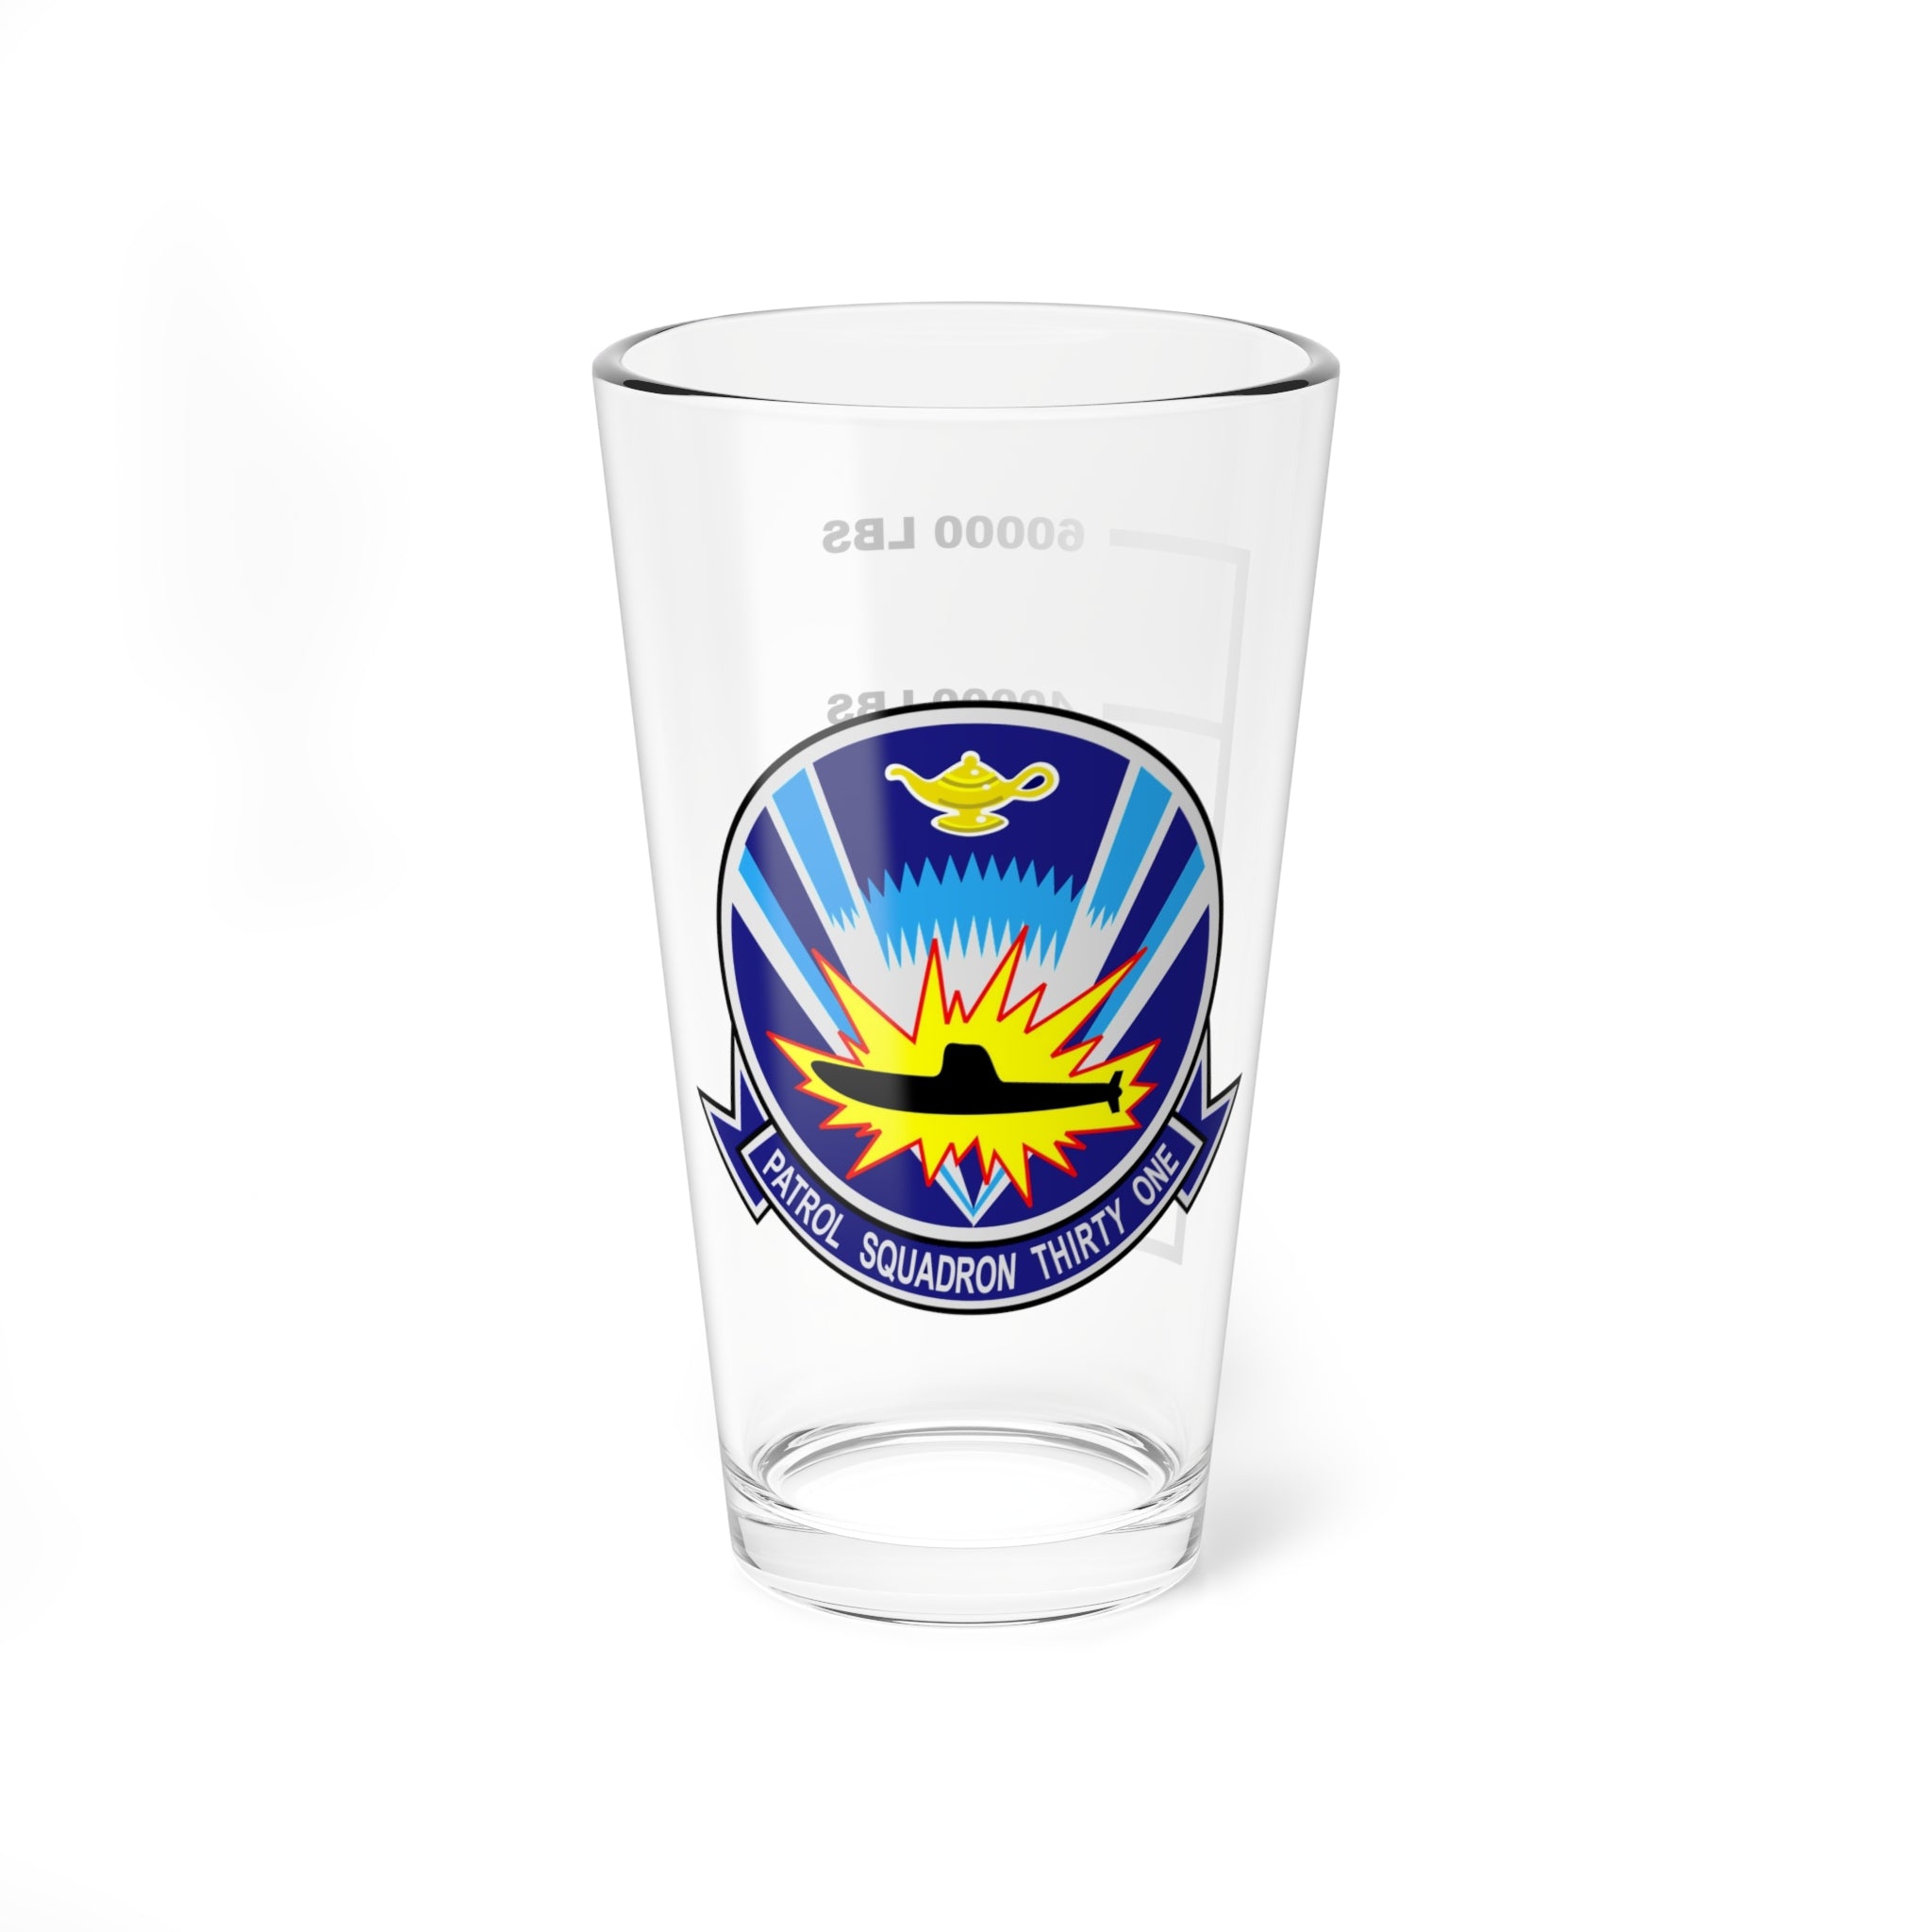 VP-31 "Black Lightinings" Fuel Low Pint Glass, Navy Maritime Patrol Fleet Replacement Squadron flying the P-3 Orion